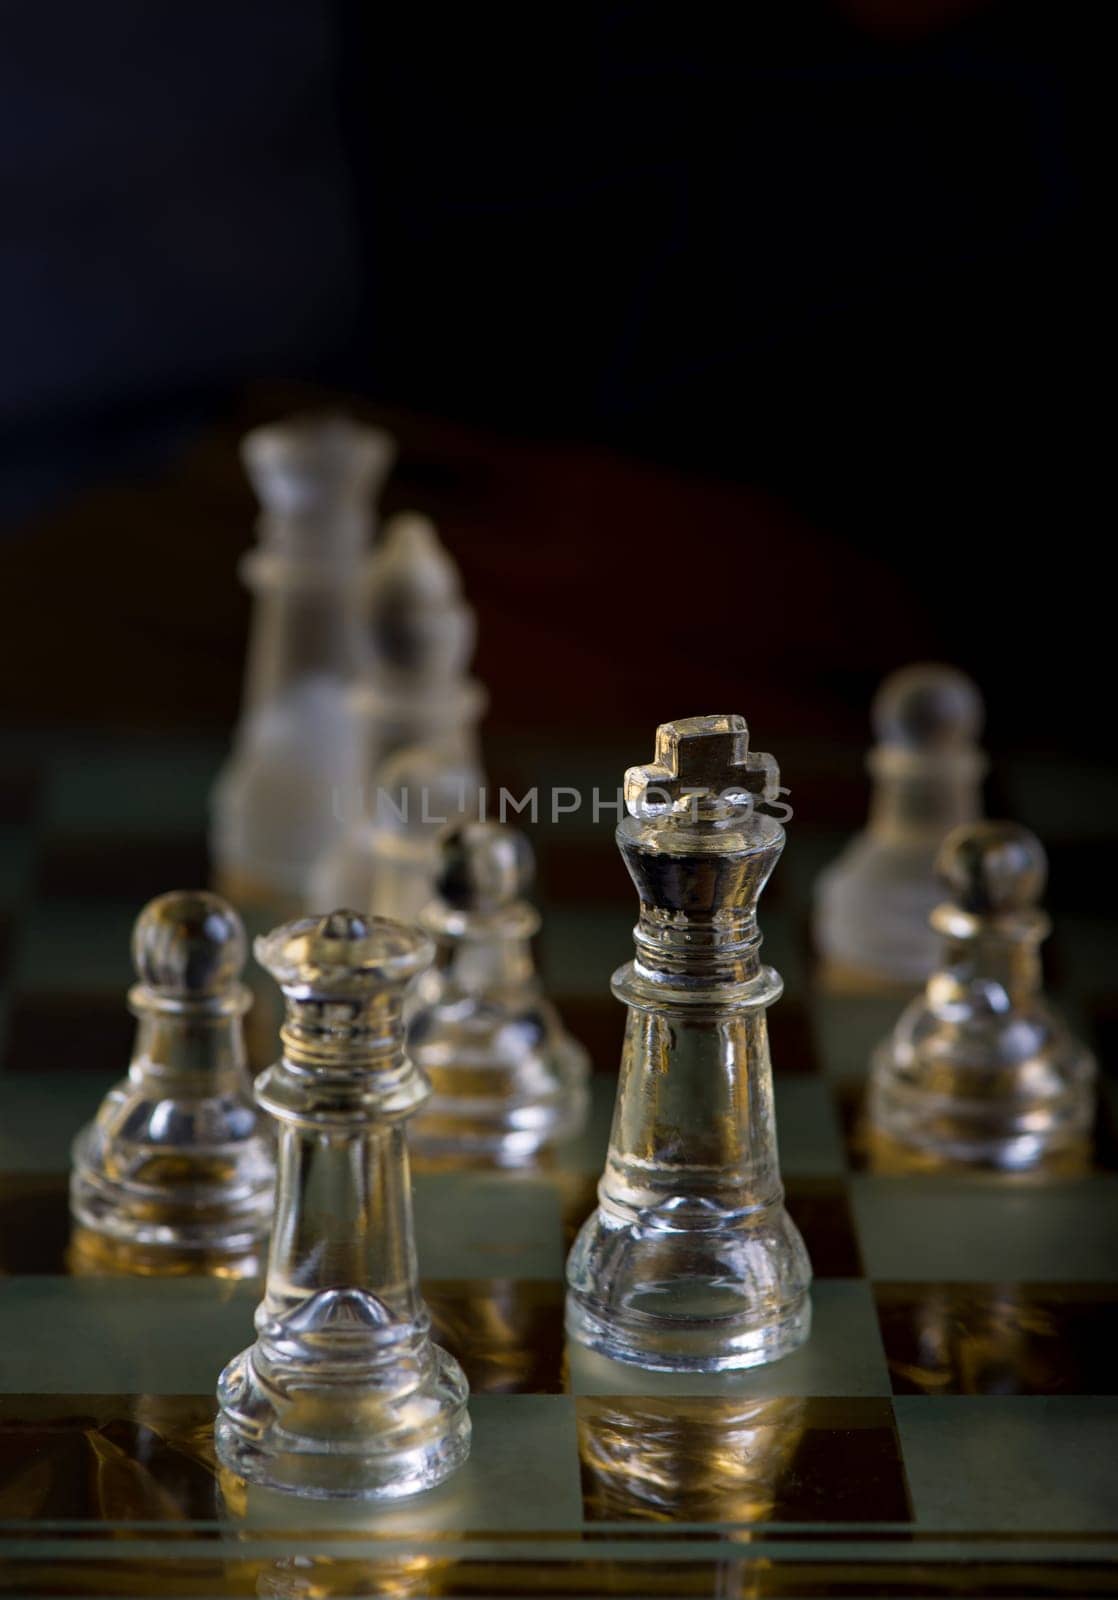 glass chess pieces are defending the king on board in dark by aprilphoto